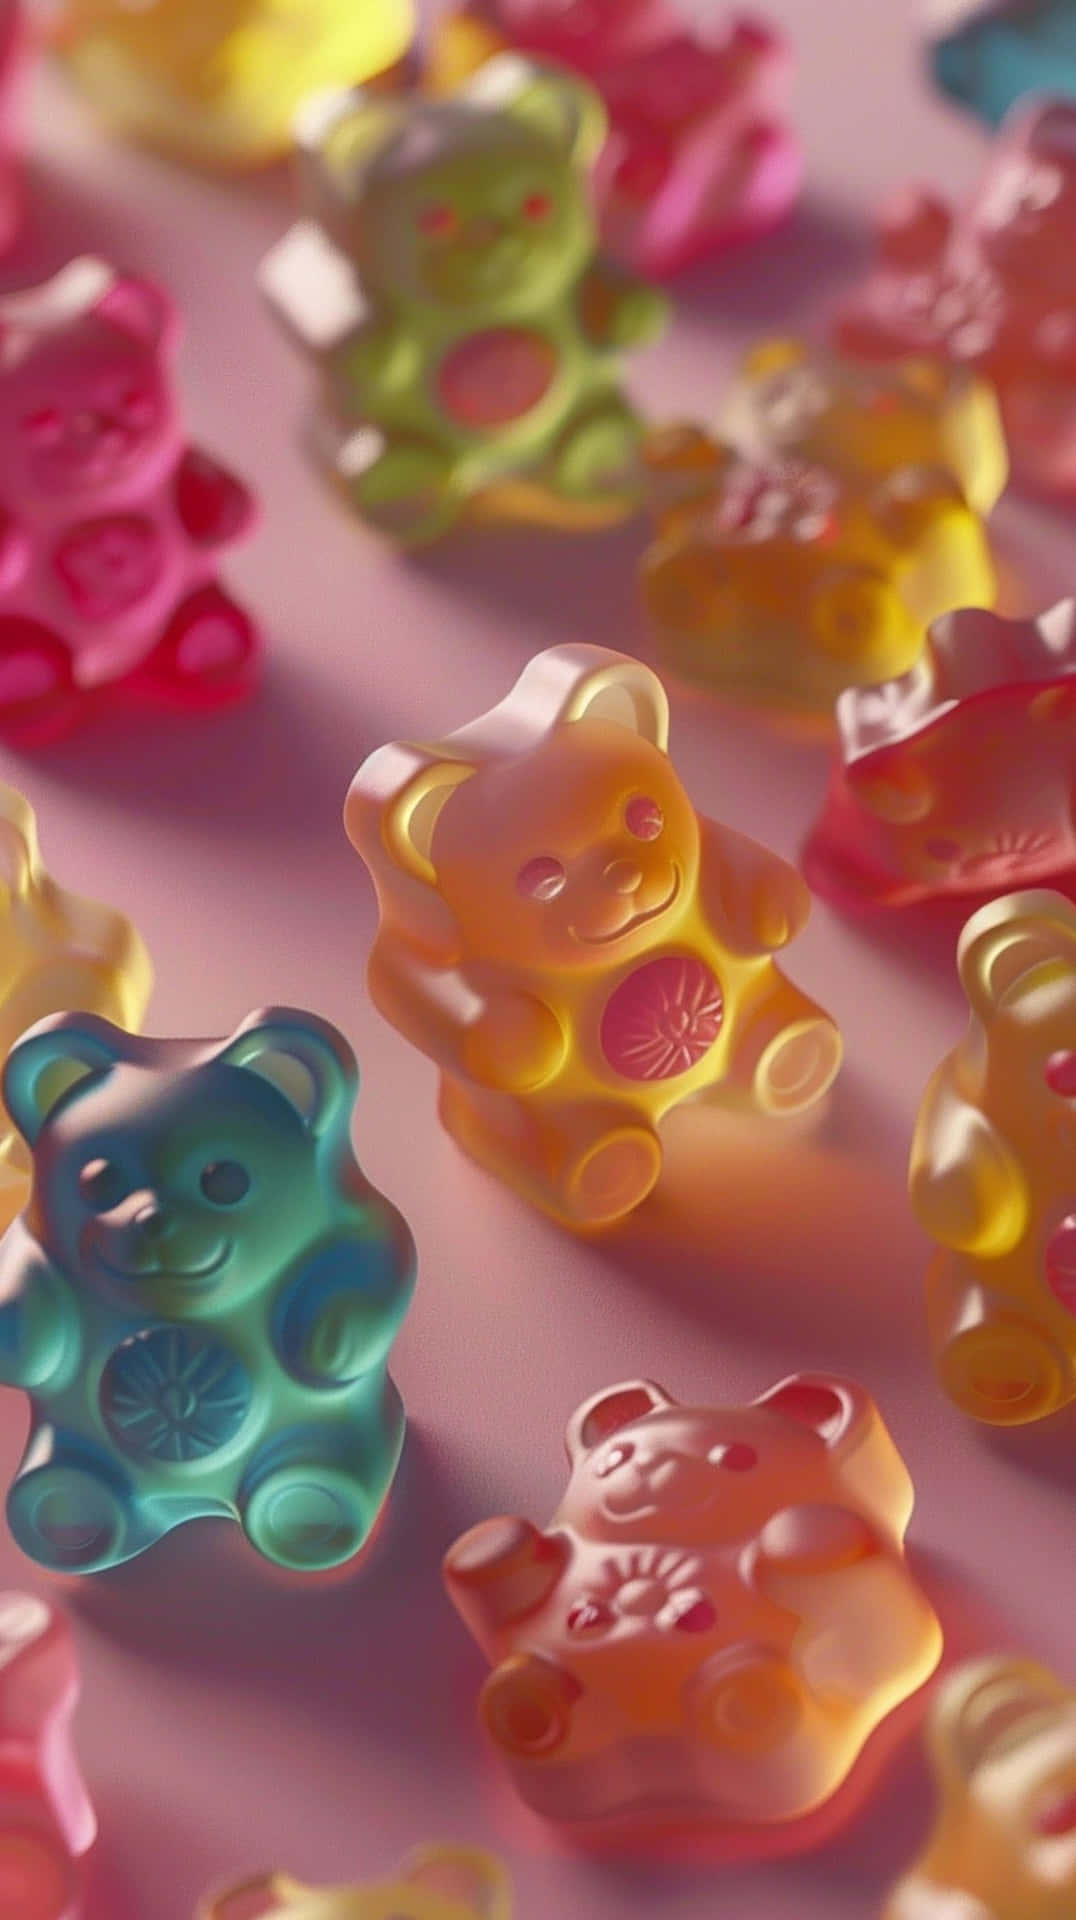 Colorful Gummy Bears Background Wallpaper